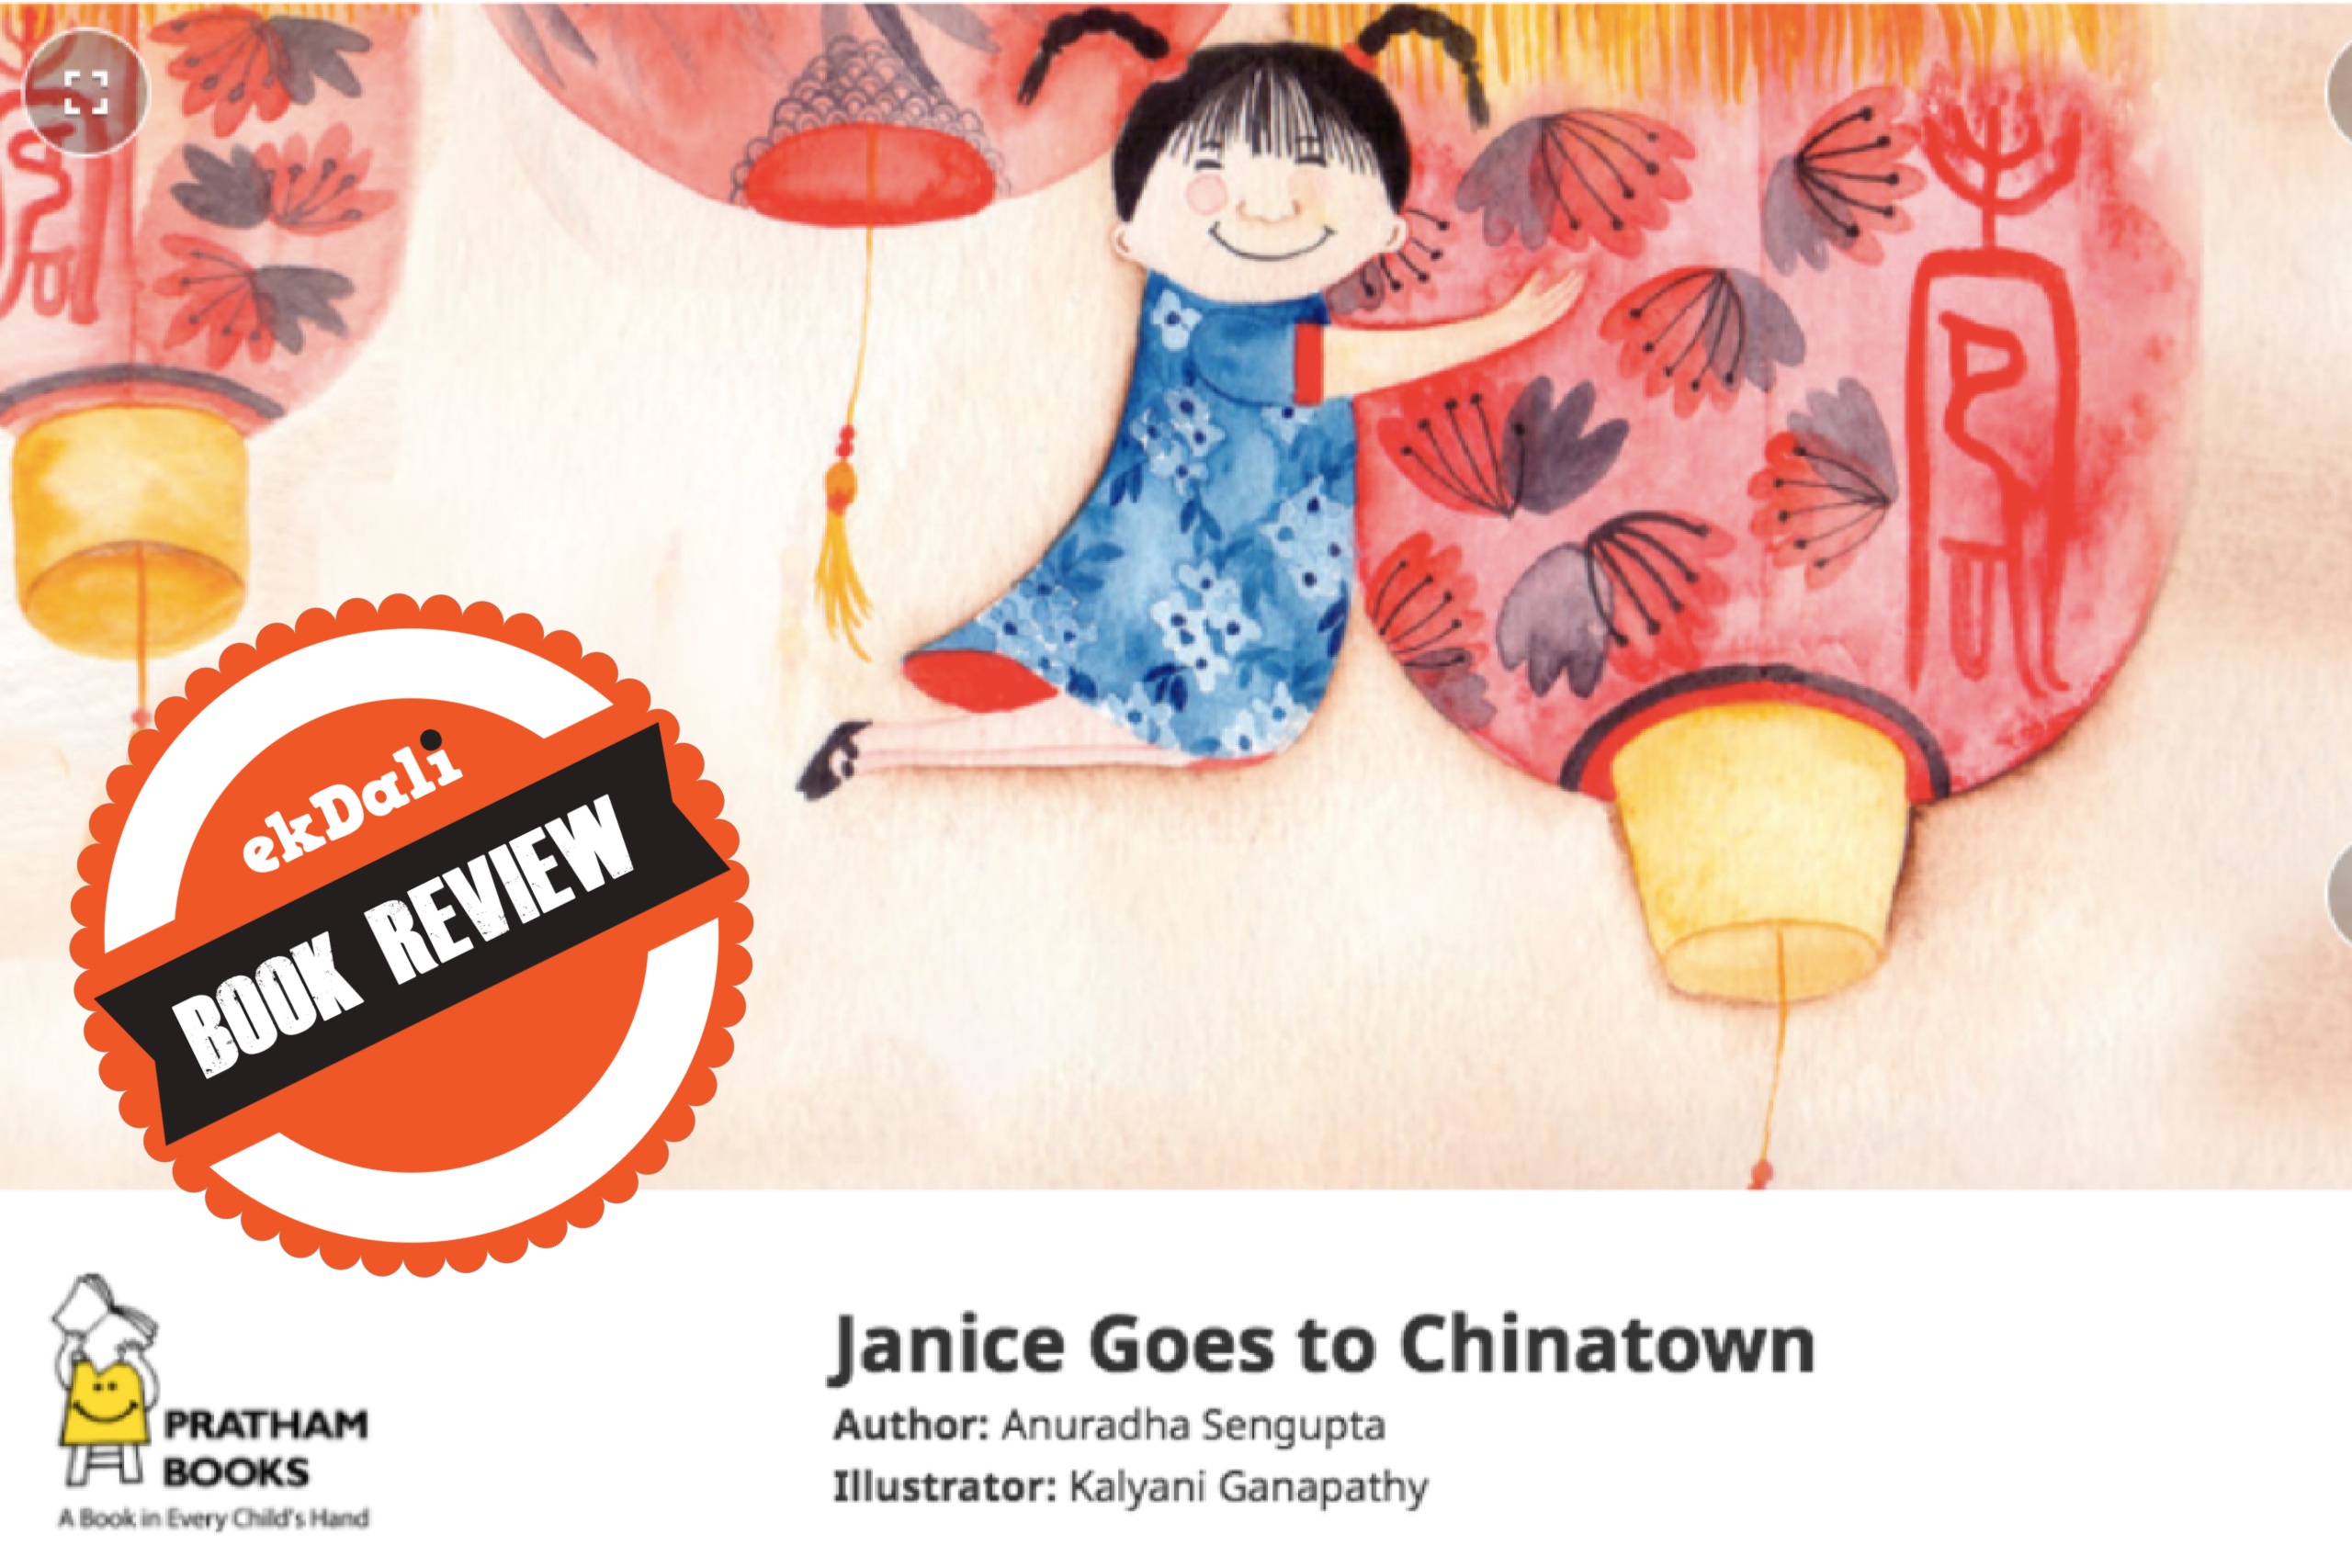 Book Review: Janice goes to Chinatown